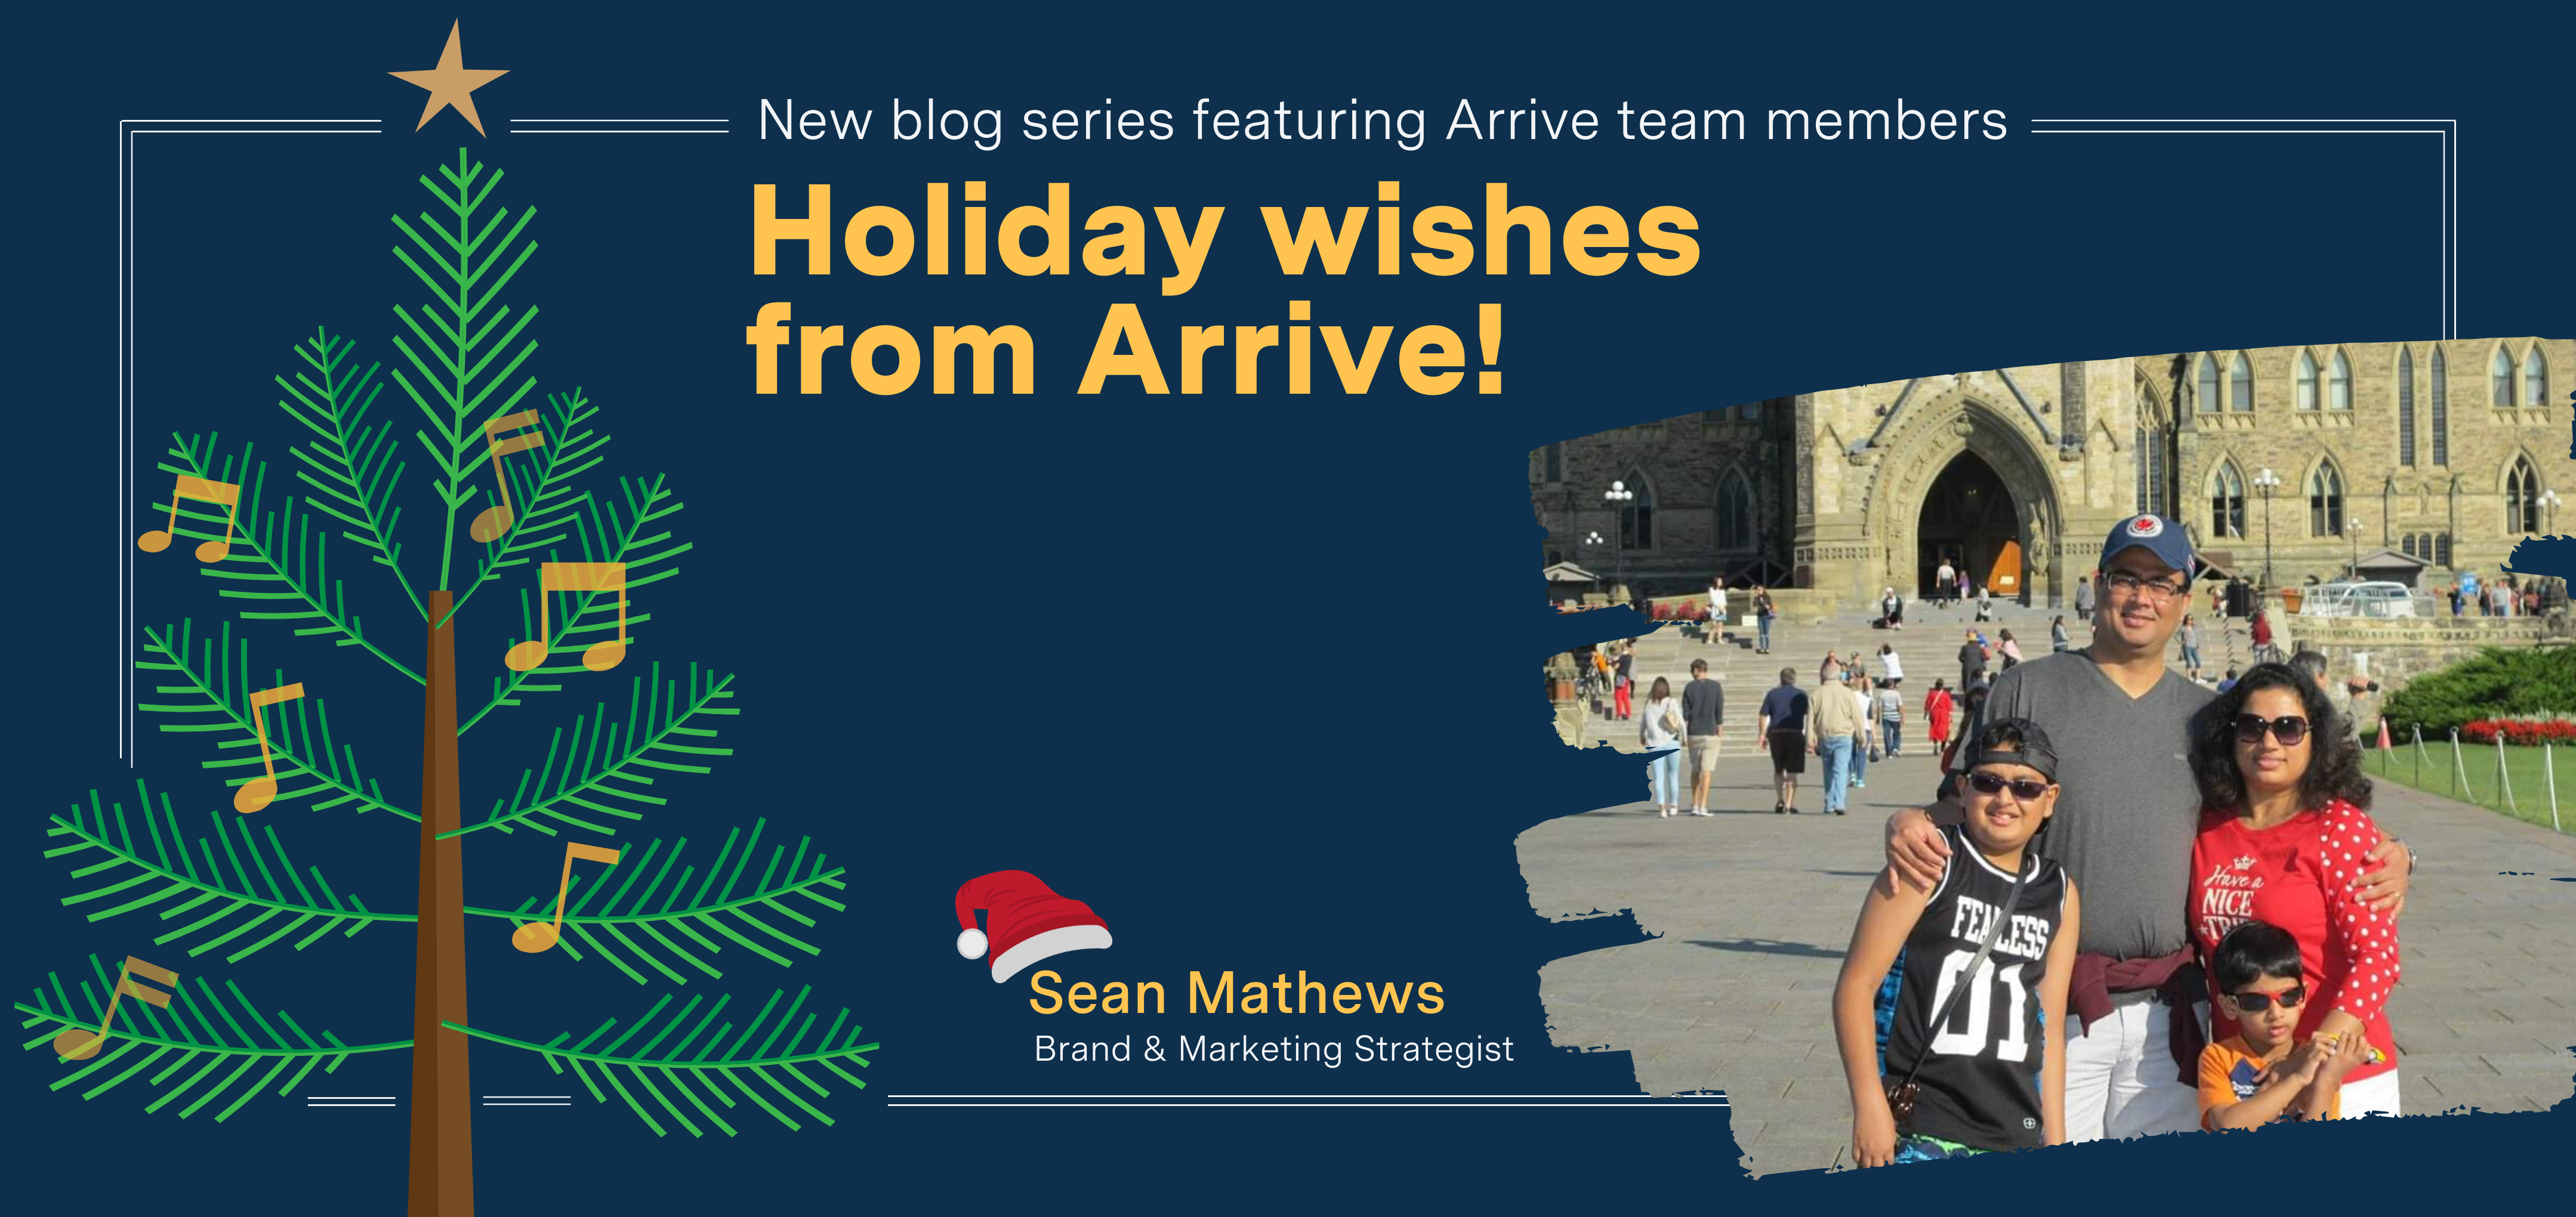 Holiday wishes from Arrive: Meet Sean Mathews